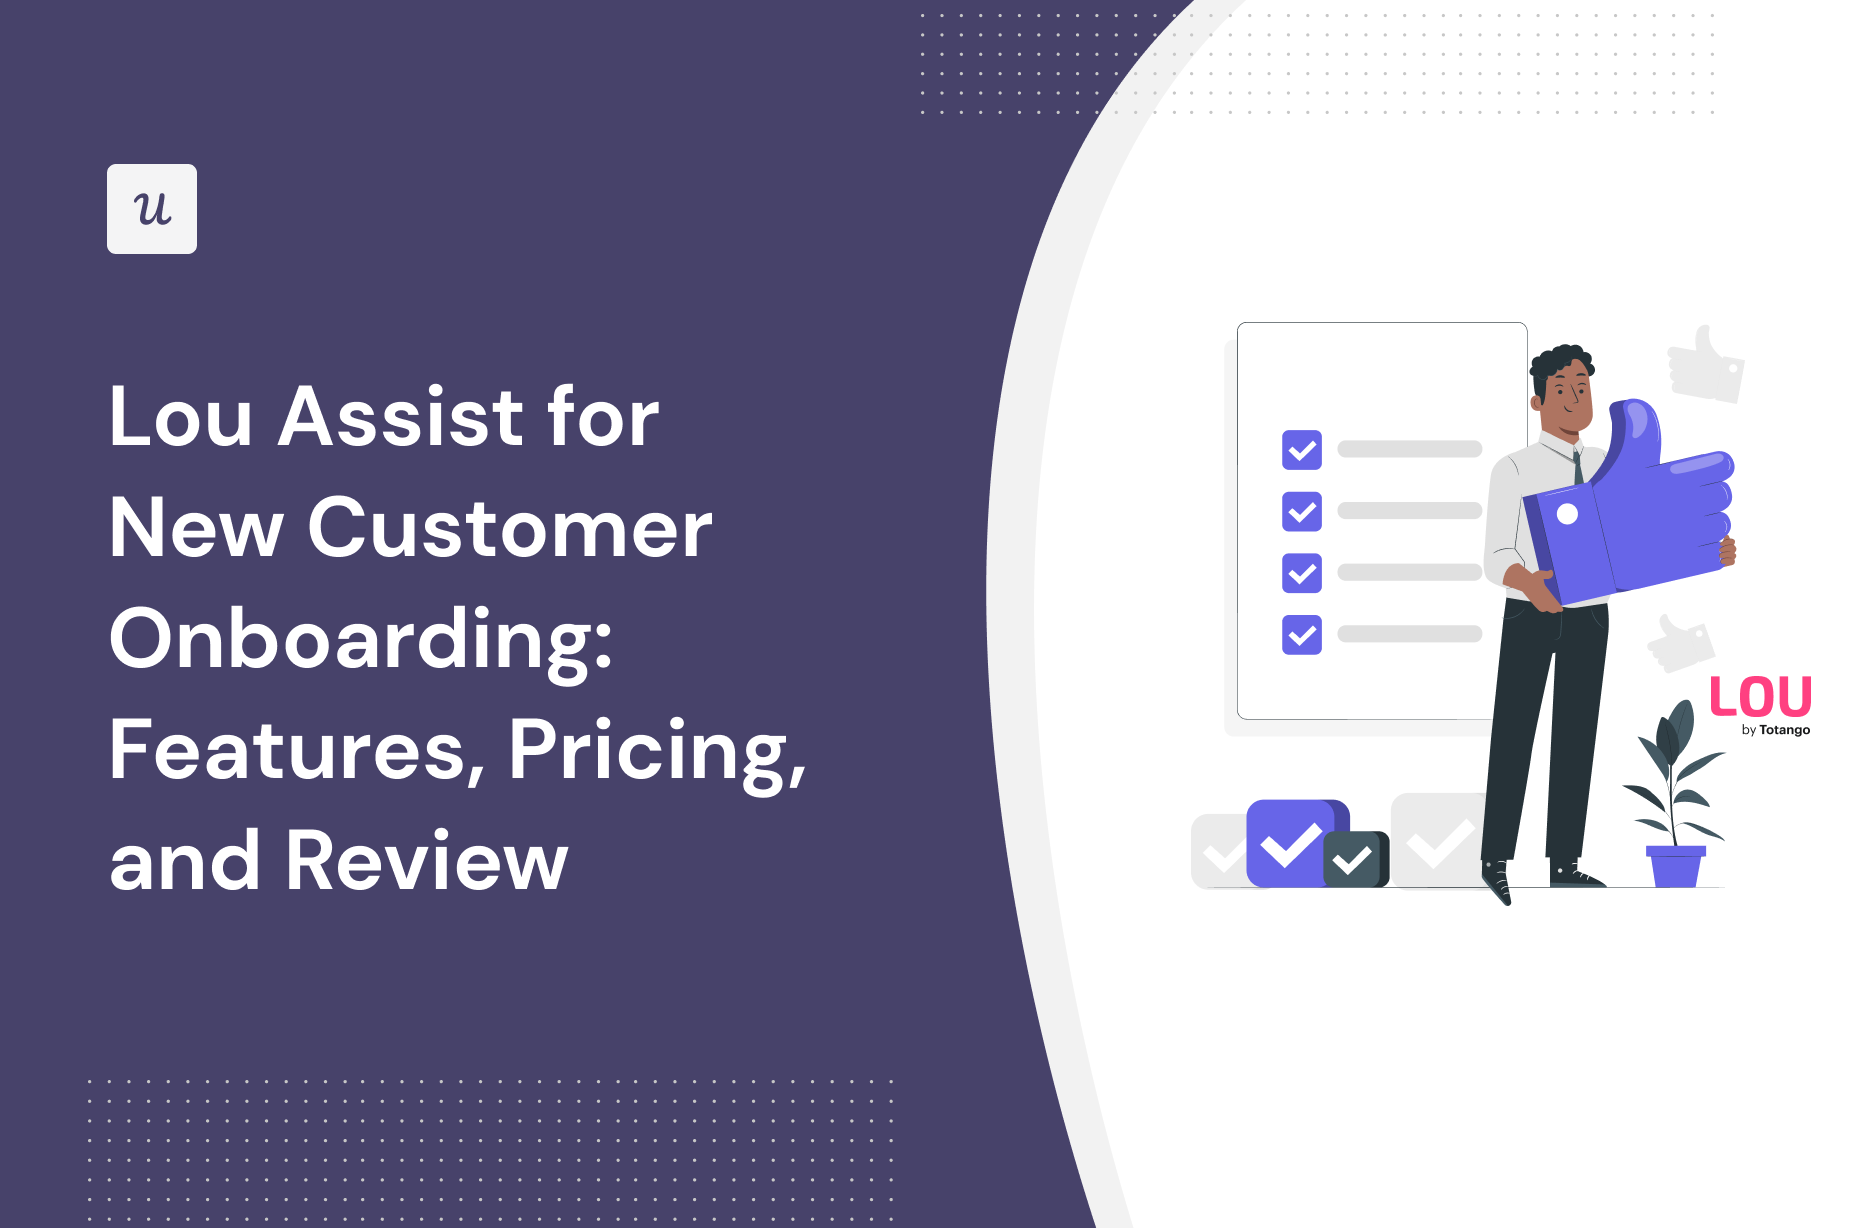 Lou Assist for New Customer Onboarding: Features, Pricing, and Review